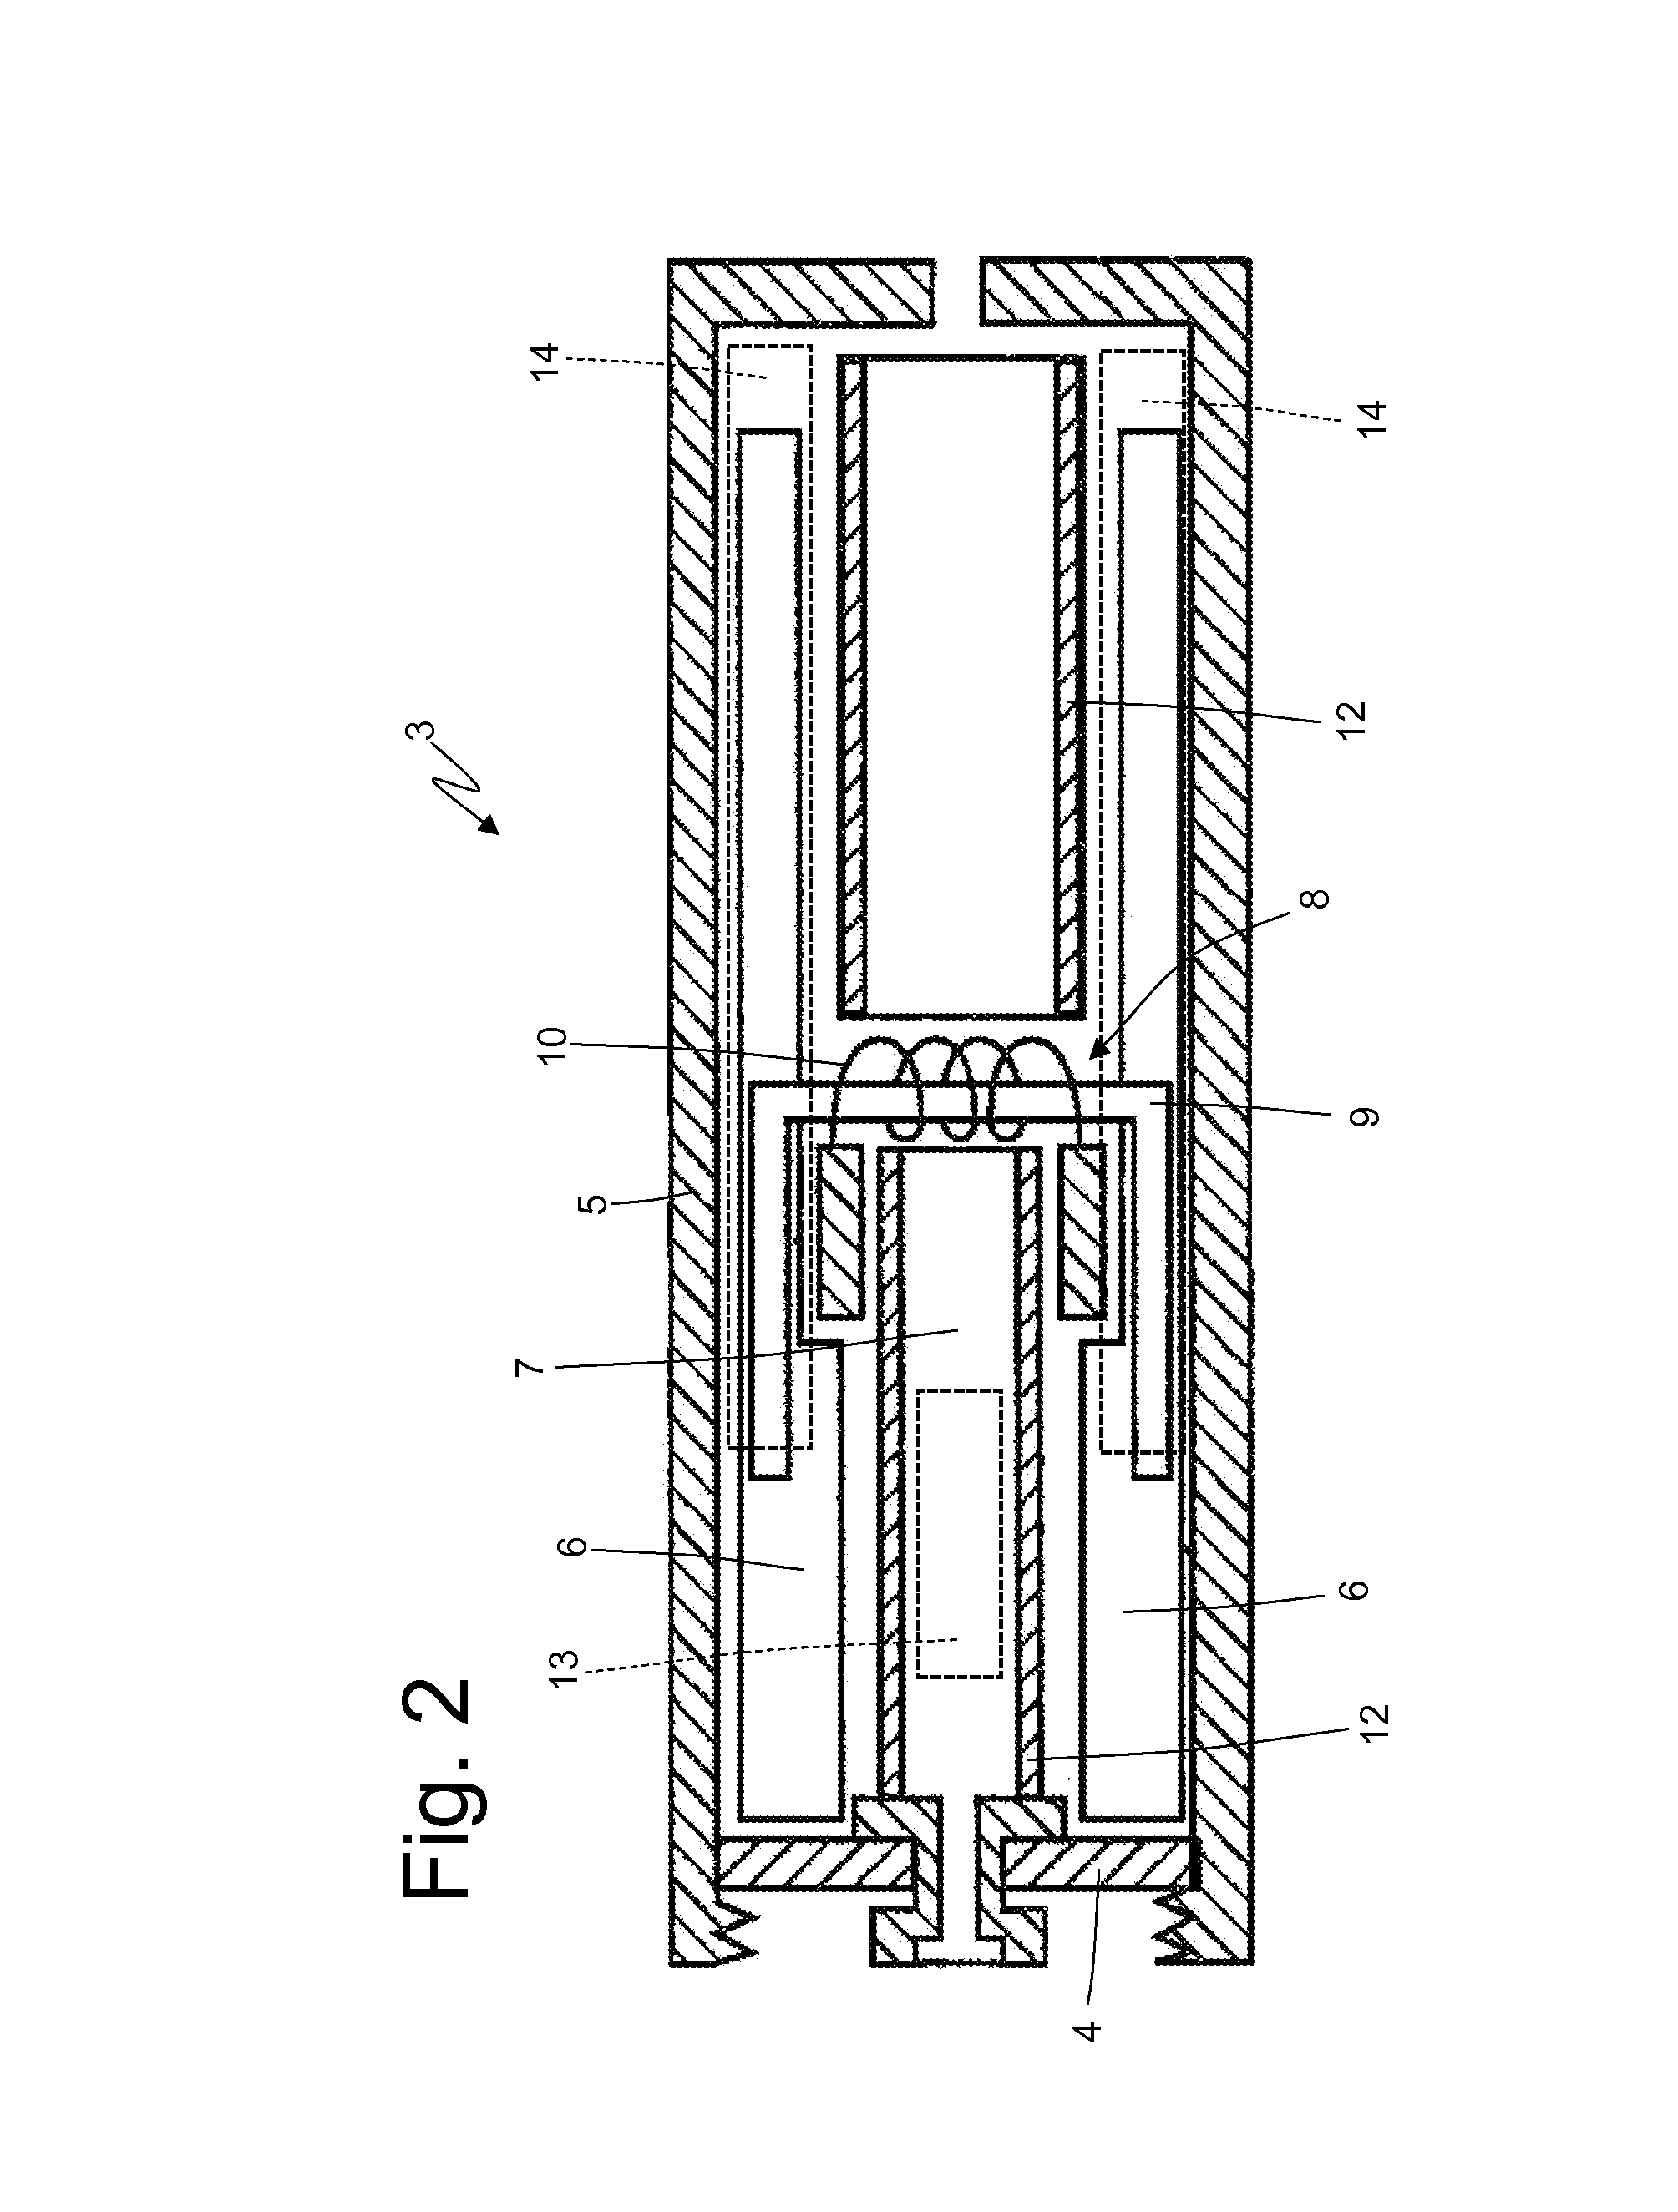 Machine and method for producing a cartridge for an electronic cigarette provided with a heat resistor